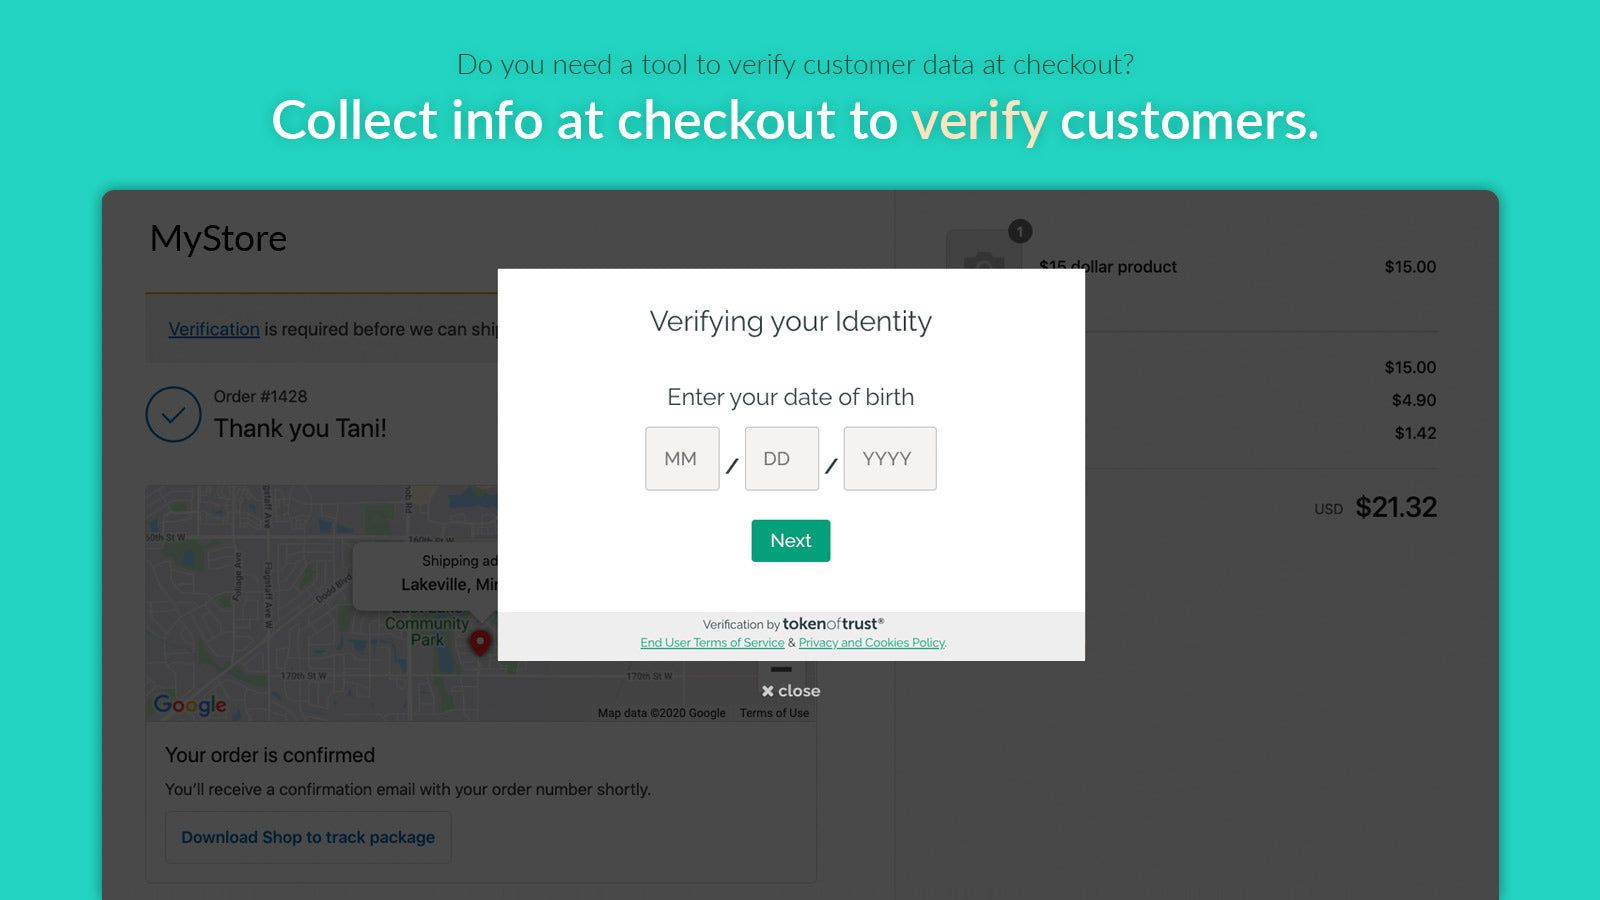 Prompt customers at checkout to get verified.